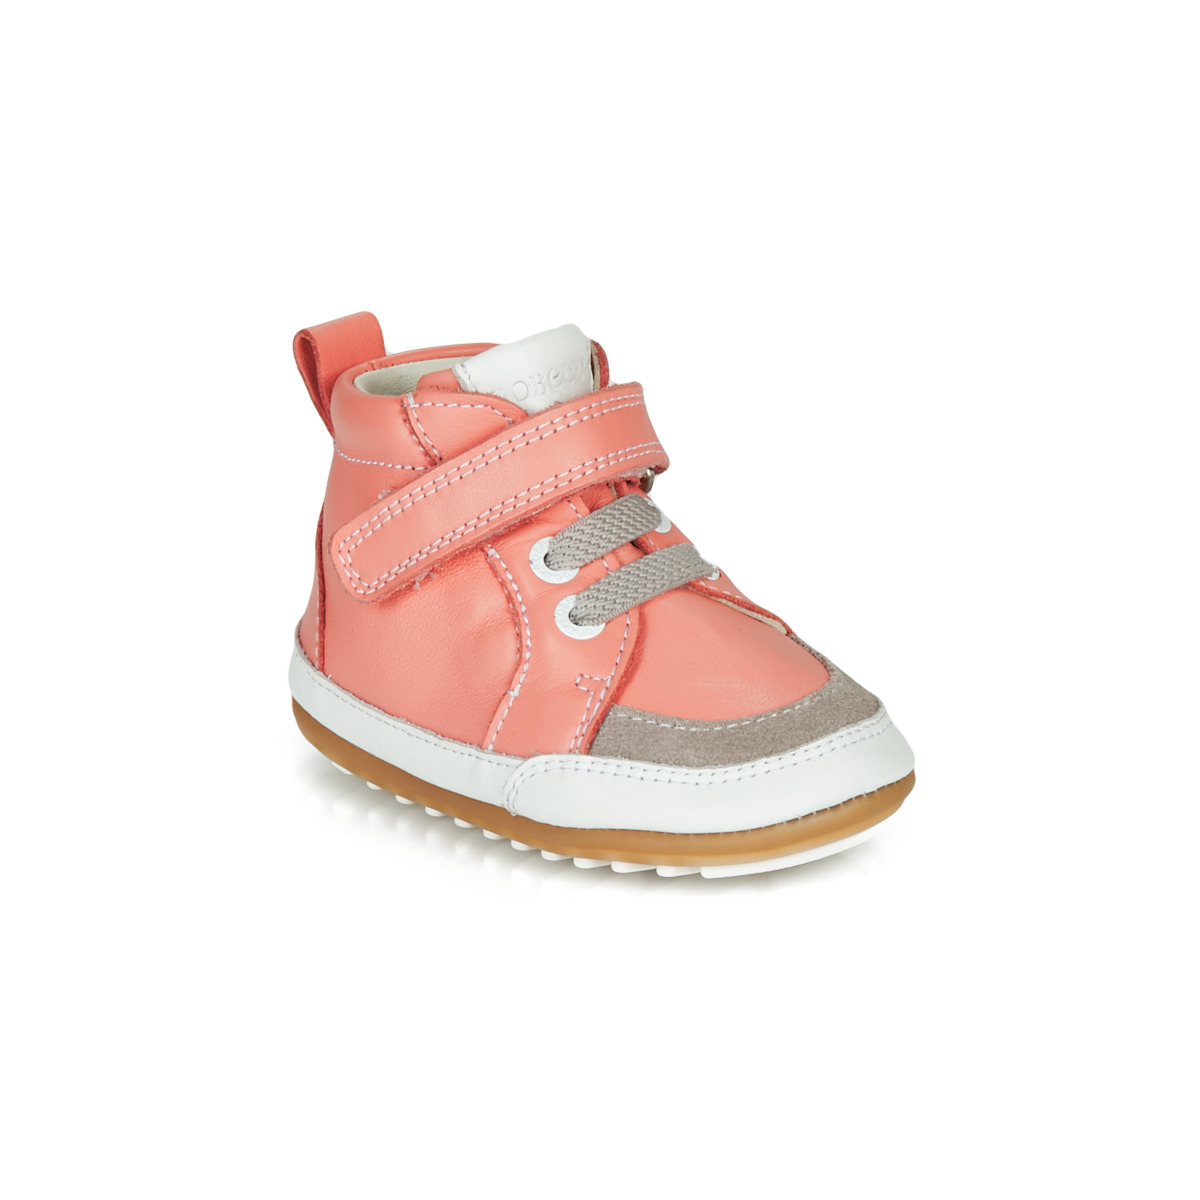 Chaussures Fille Boots Robeez MIGOLO Rose